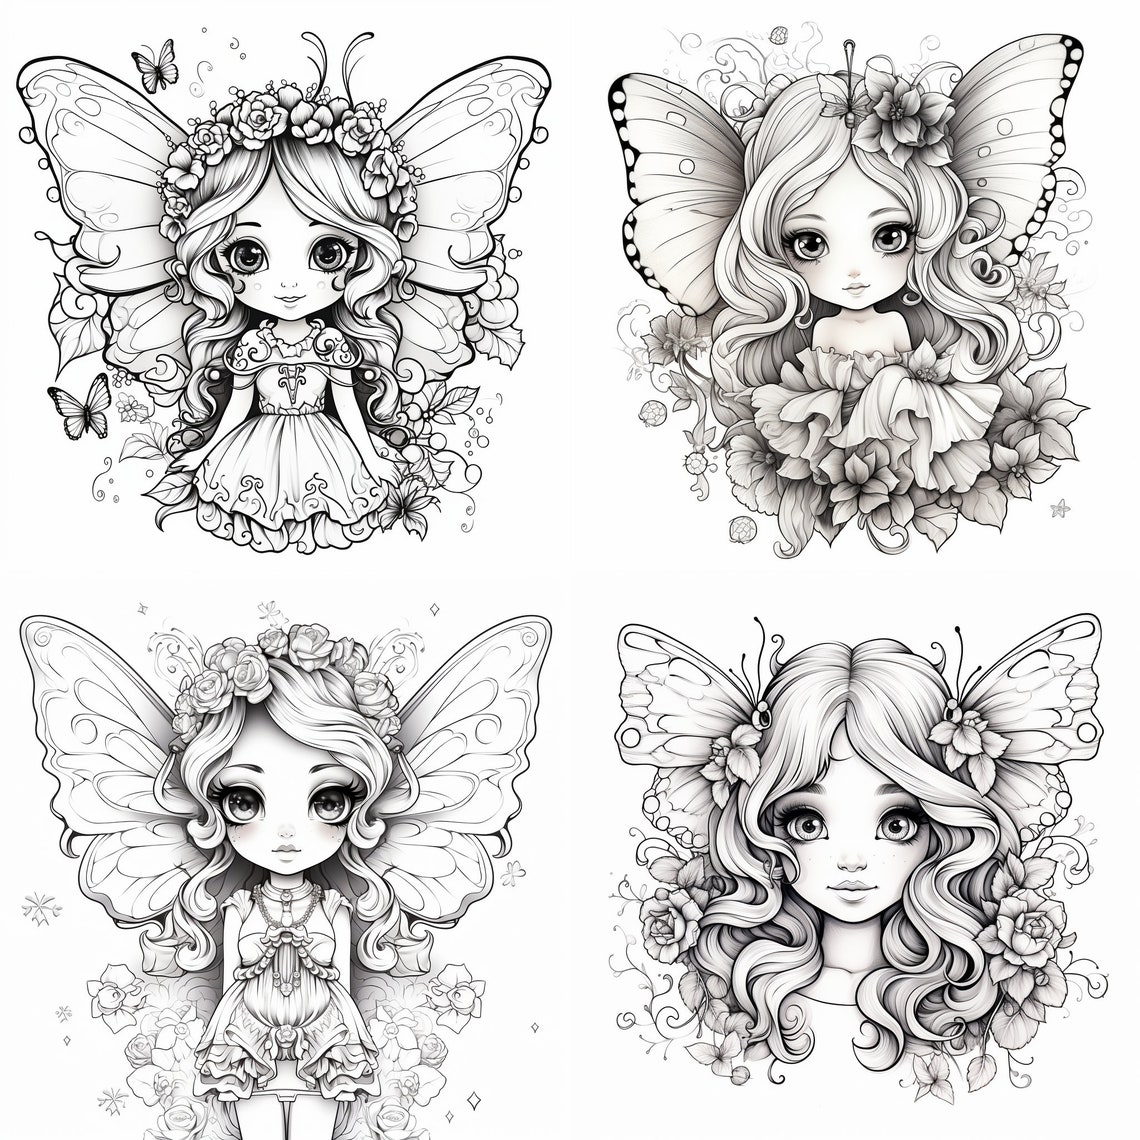 12 Fairy Coloring Pages Adults and Children (Download Now) - Etsy